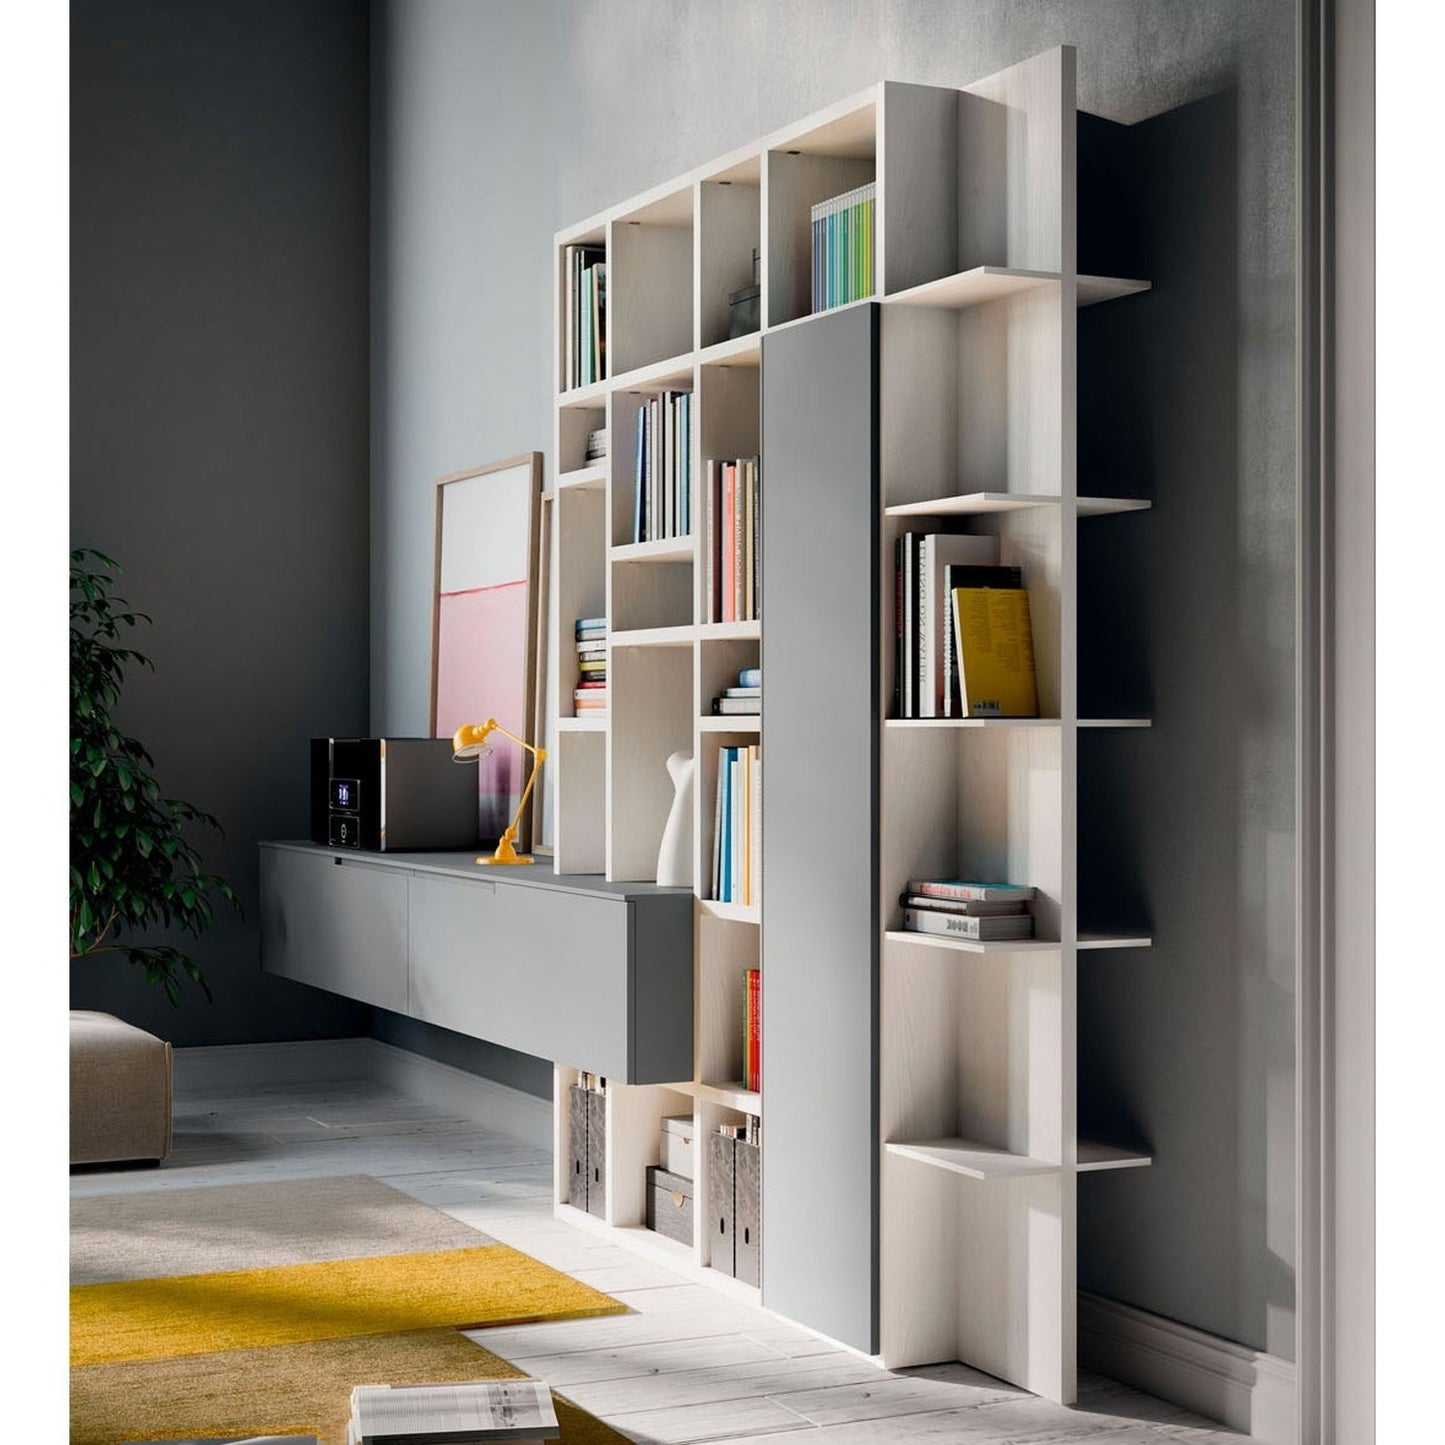 Light Day 21 Bookcase with media unit by Orme Design